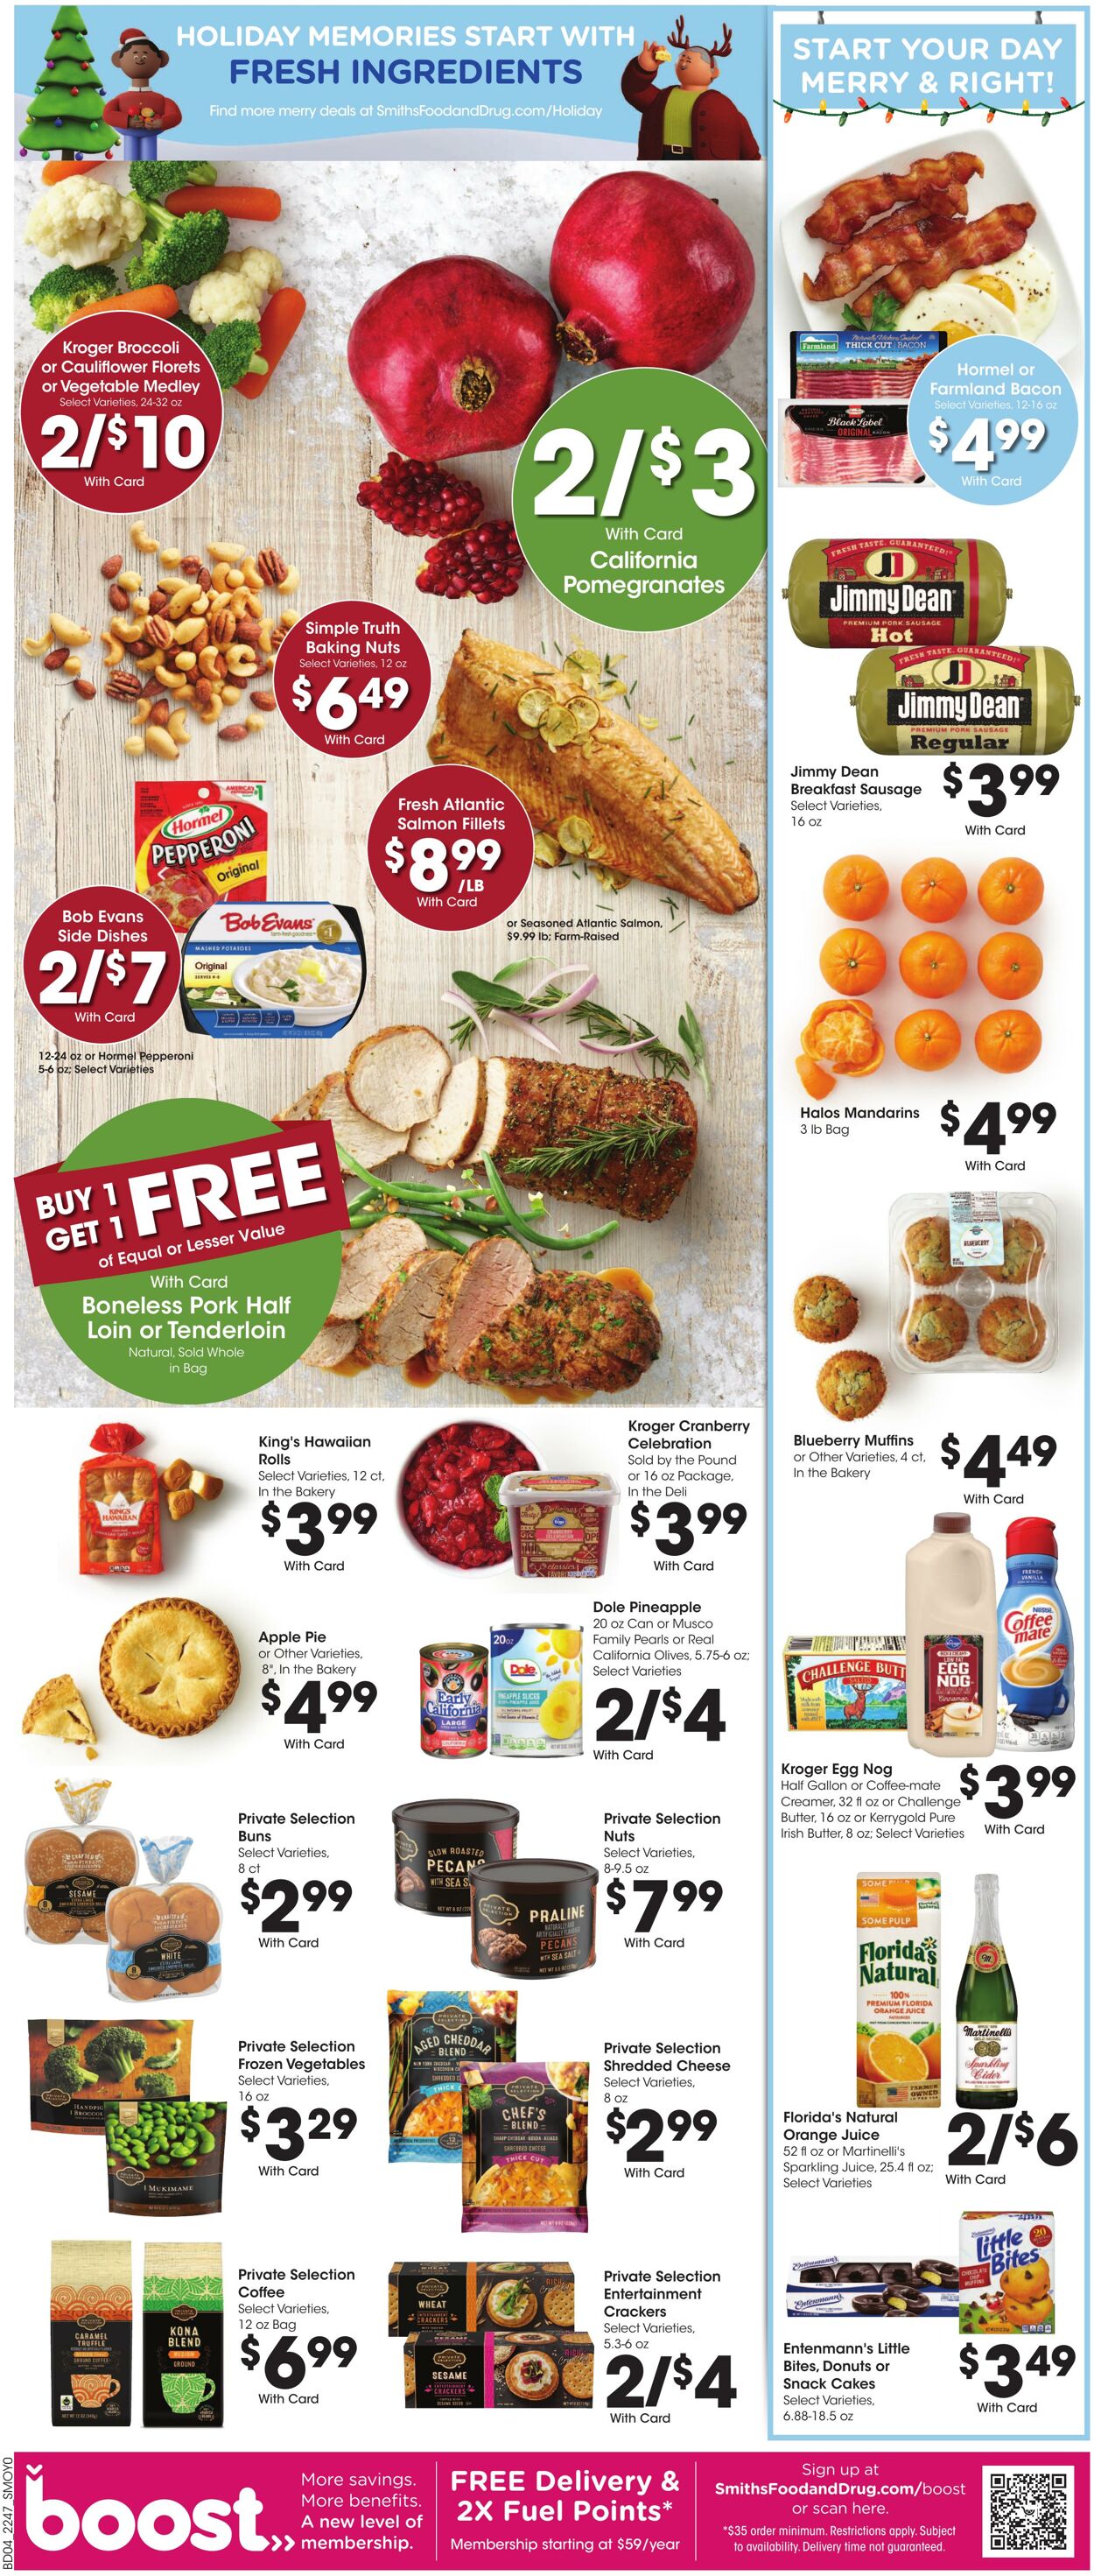 Weekly ad Smith’s Food and Drug 12/21/2022 - 12/27/2022